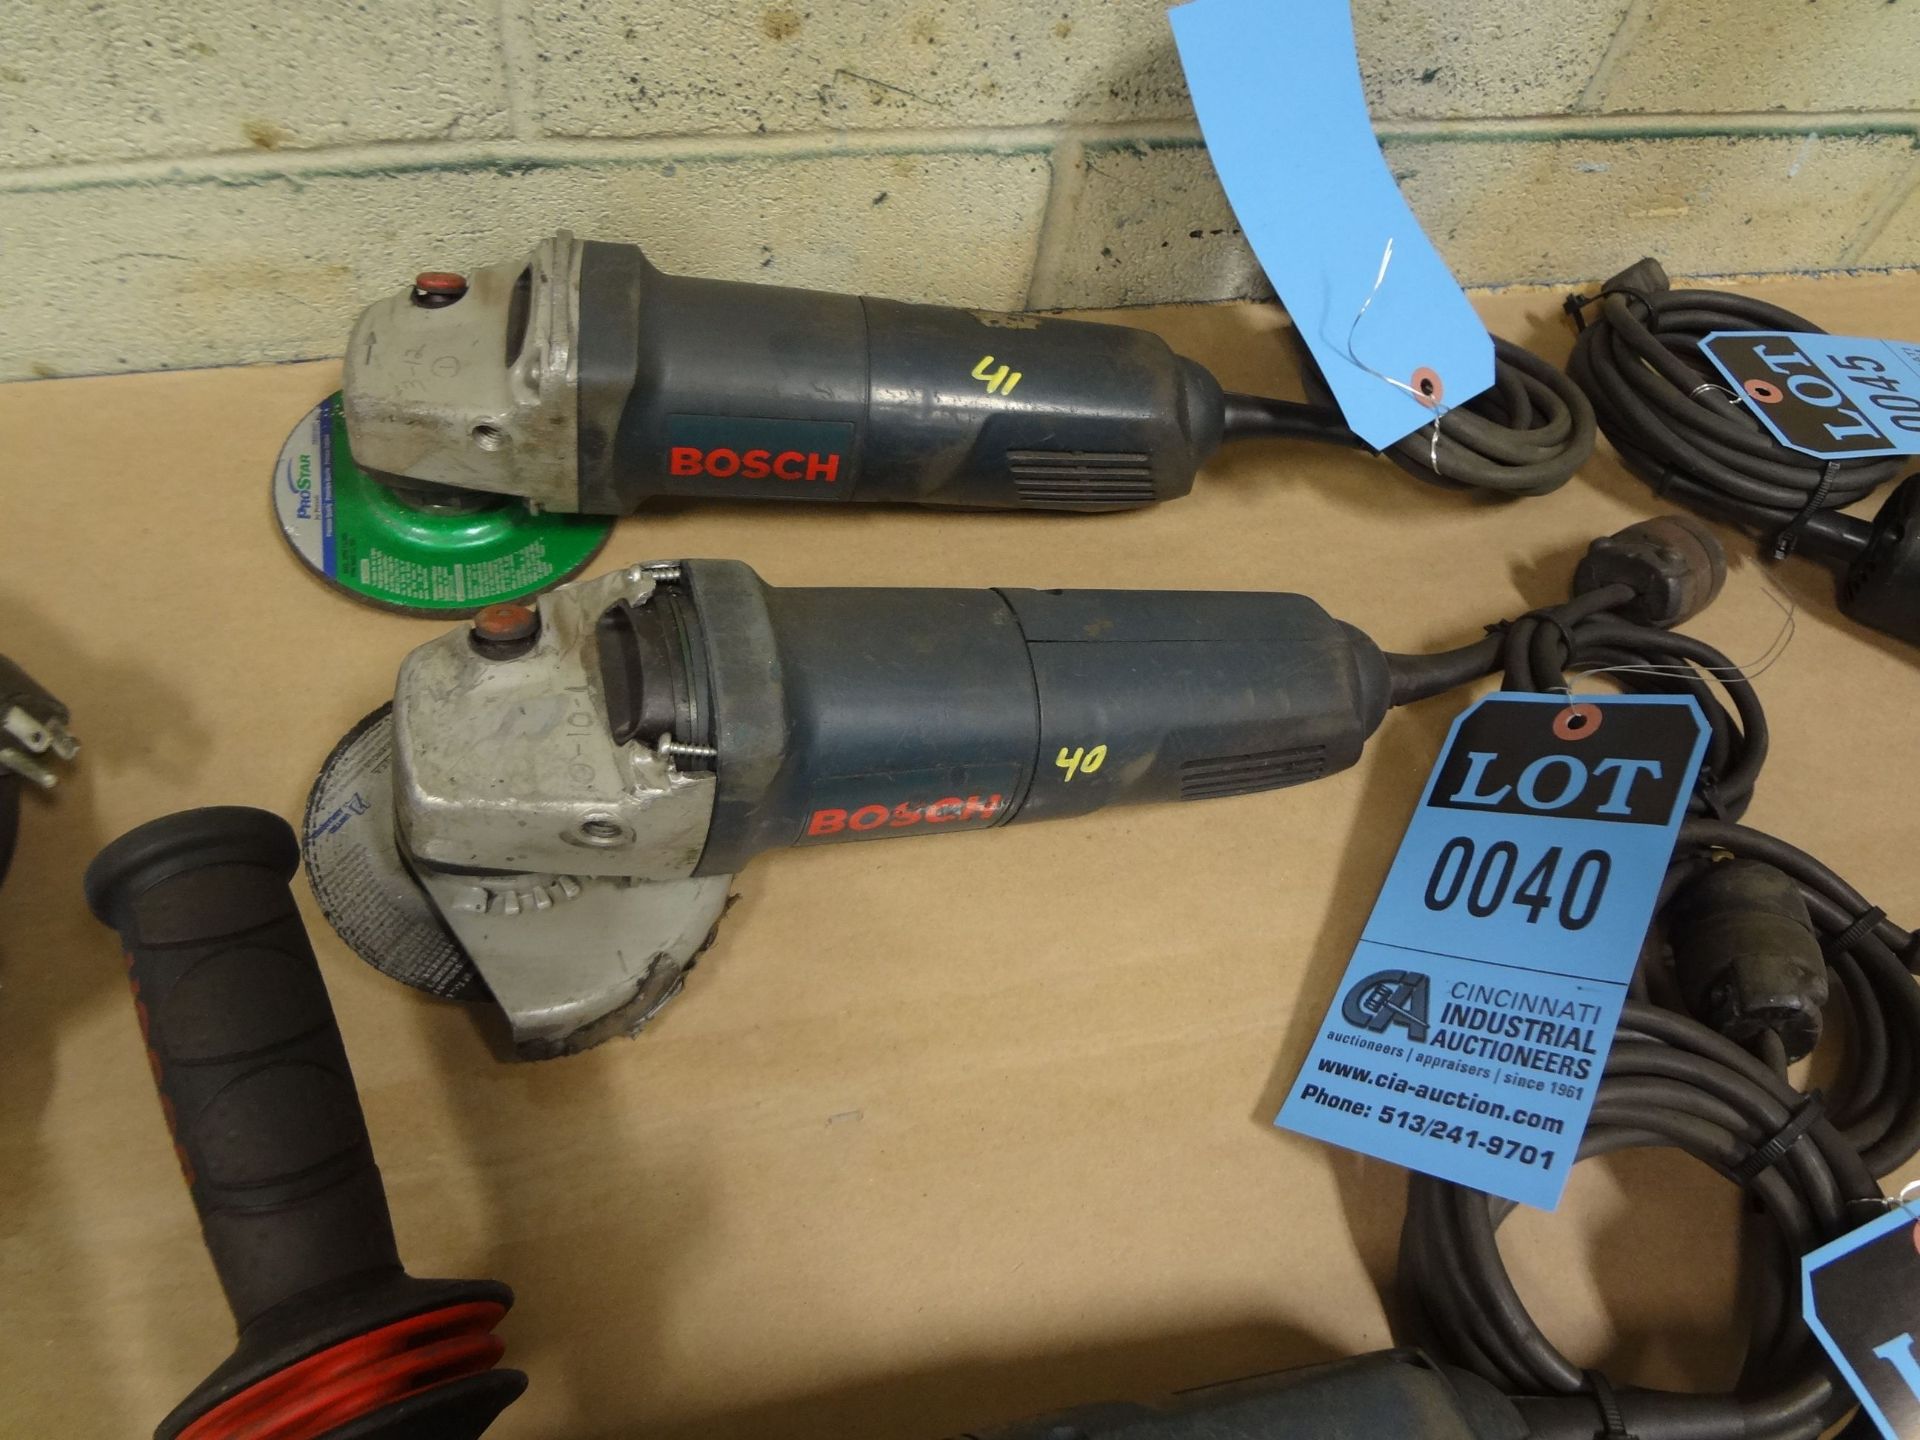 4-1/2" BOSCH ELECTRIC ANGLE GRINDER